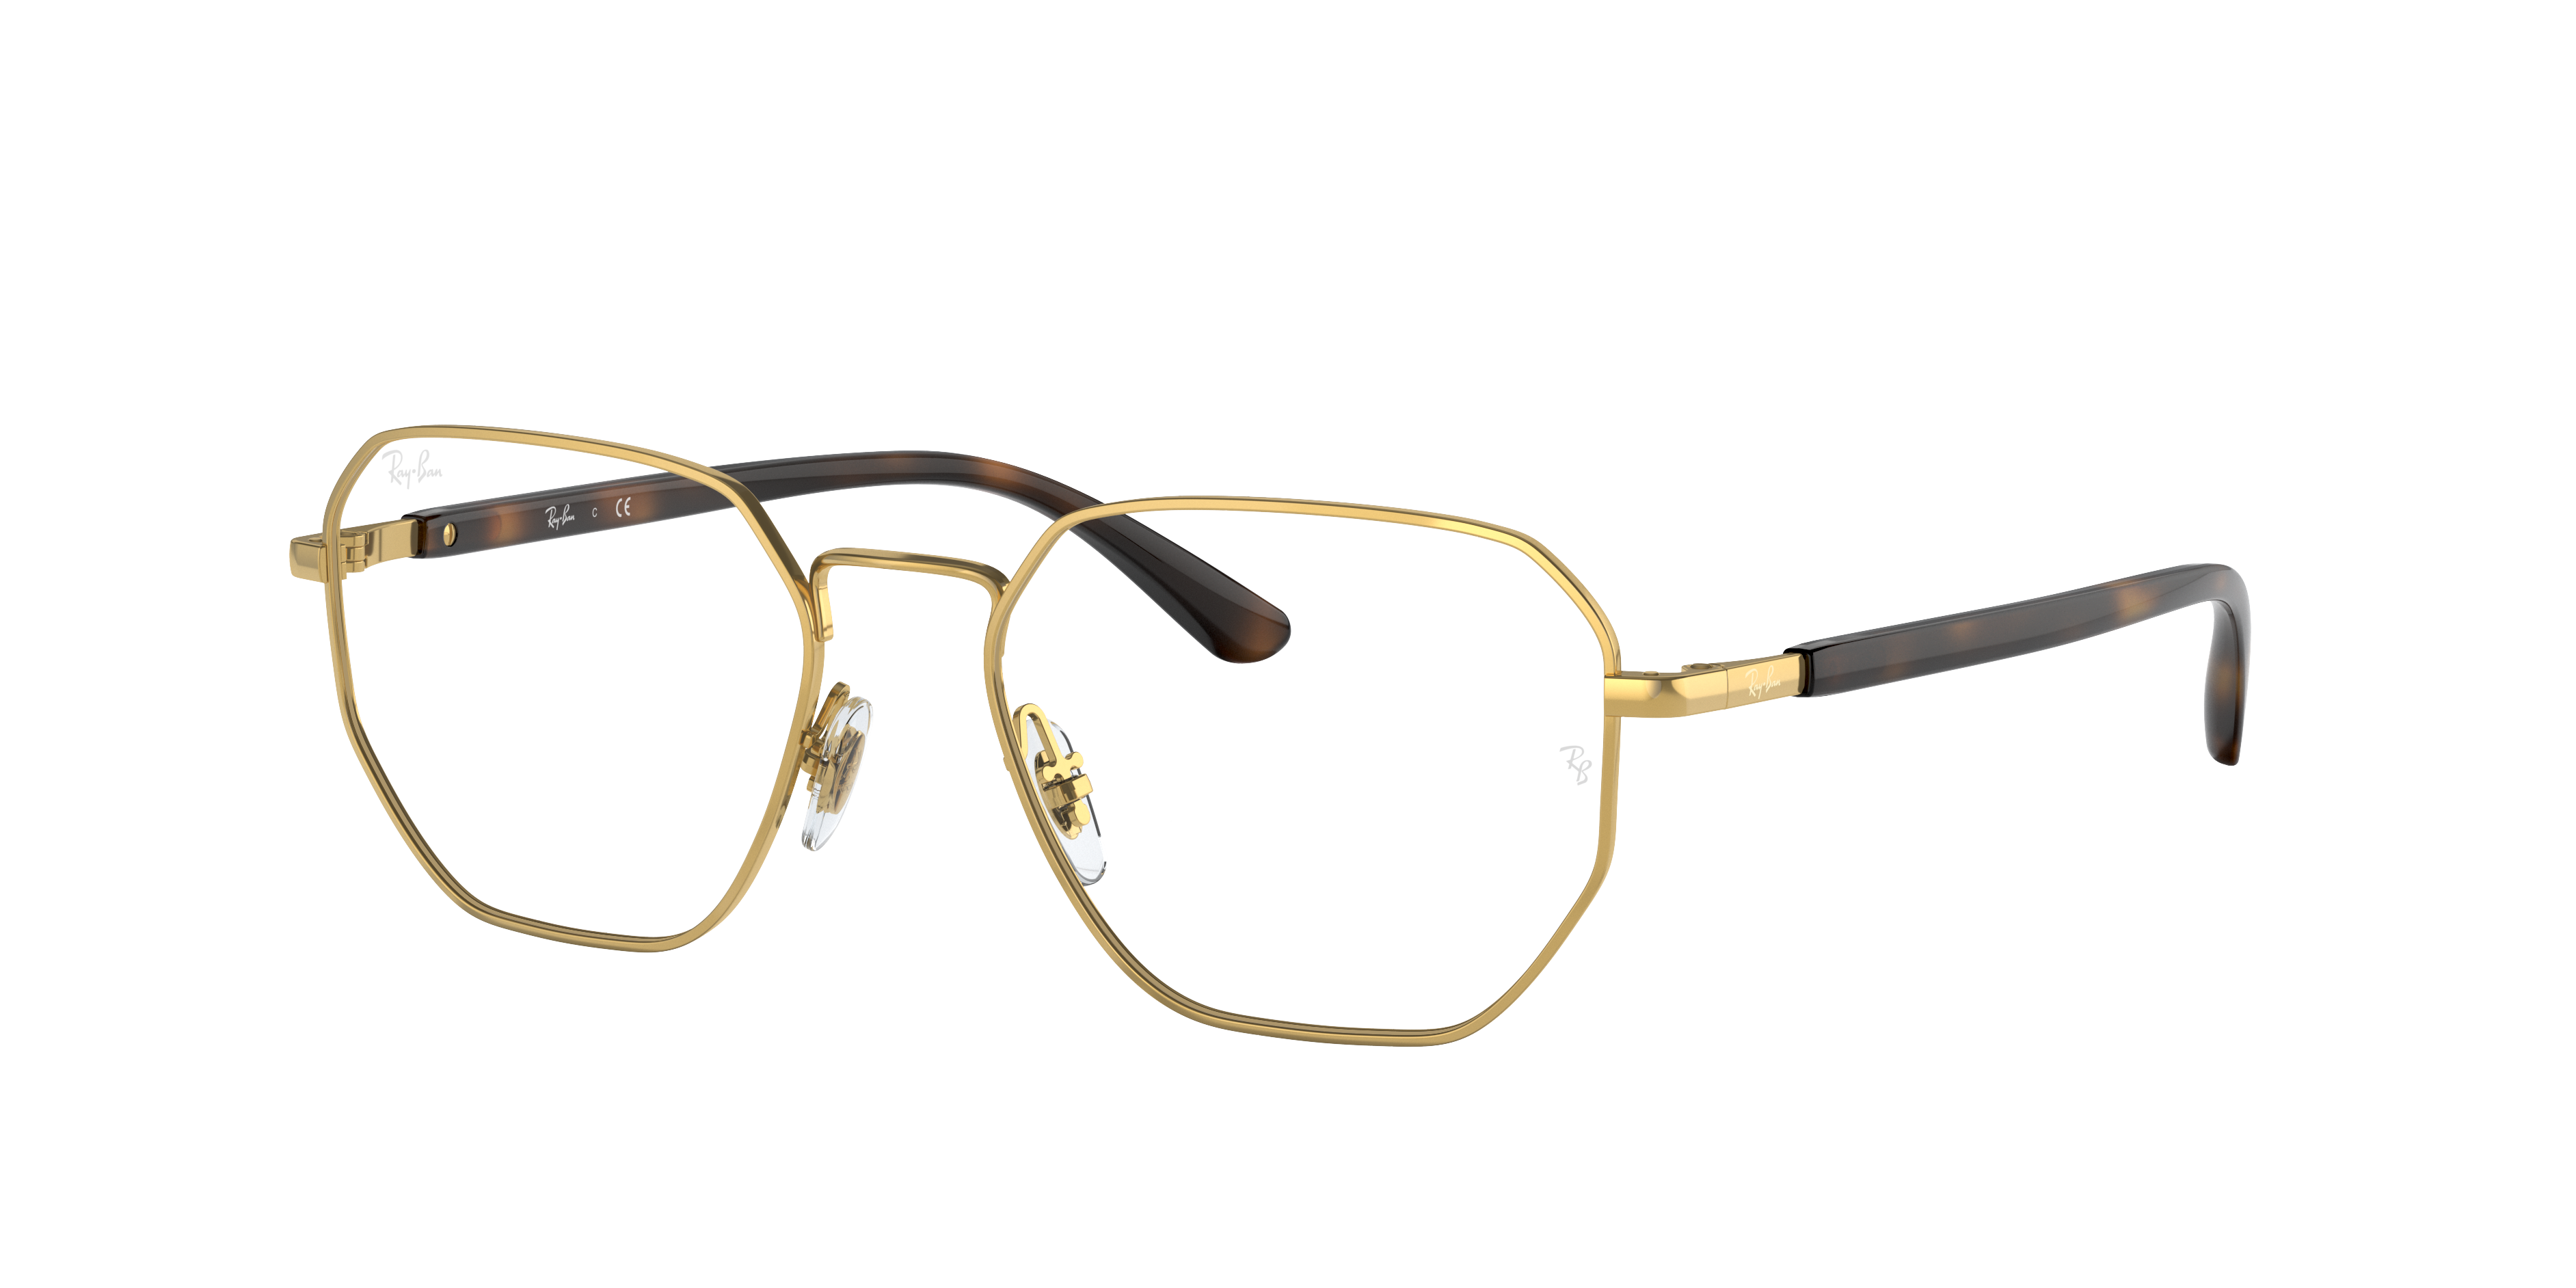 Rb6471 Eyeglasses with Gold Frame | Ray-Ban®